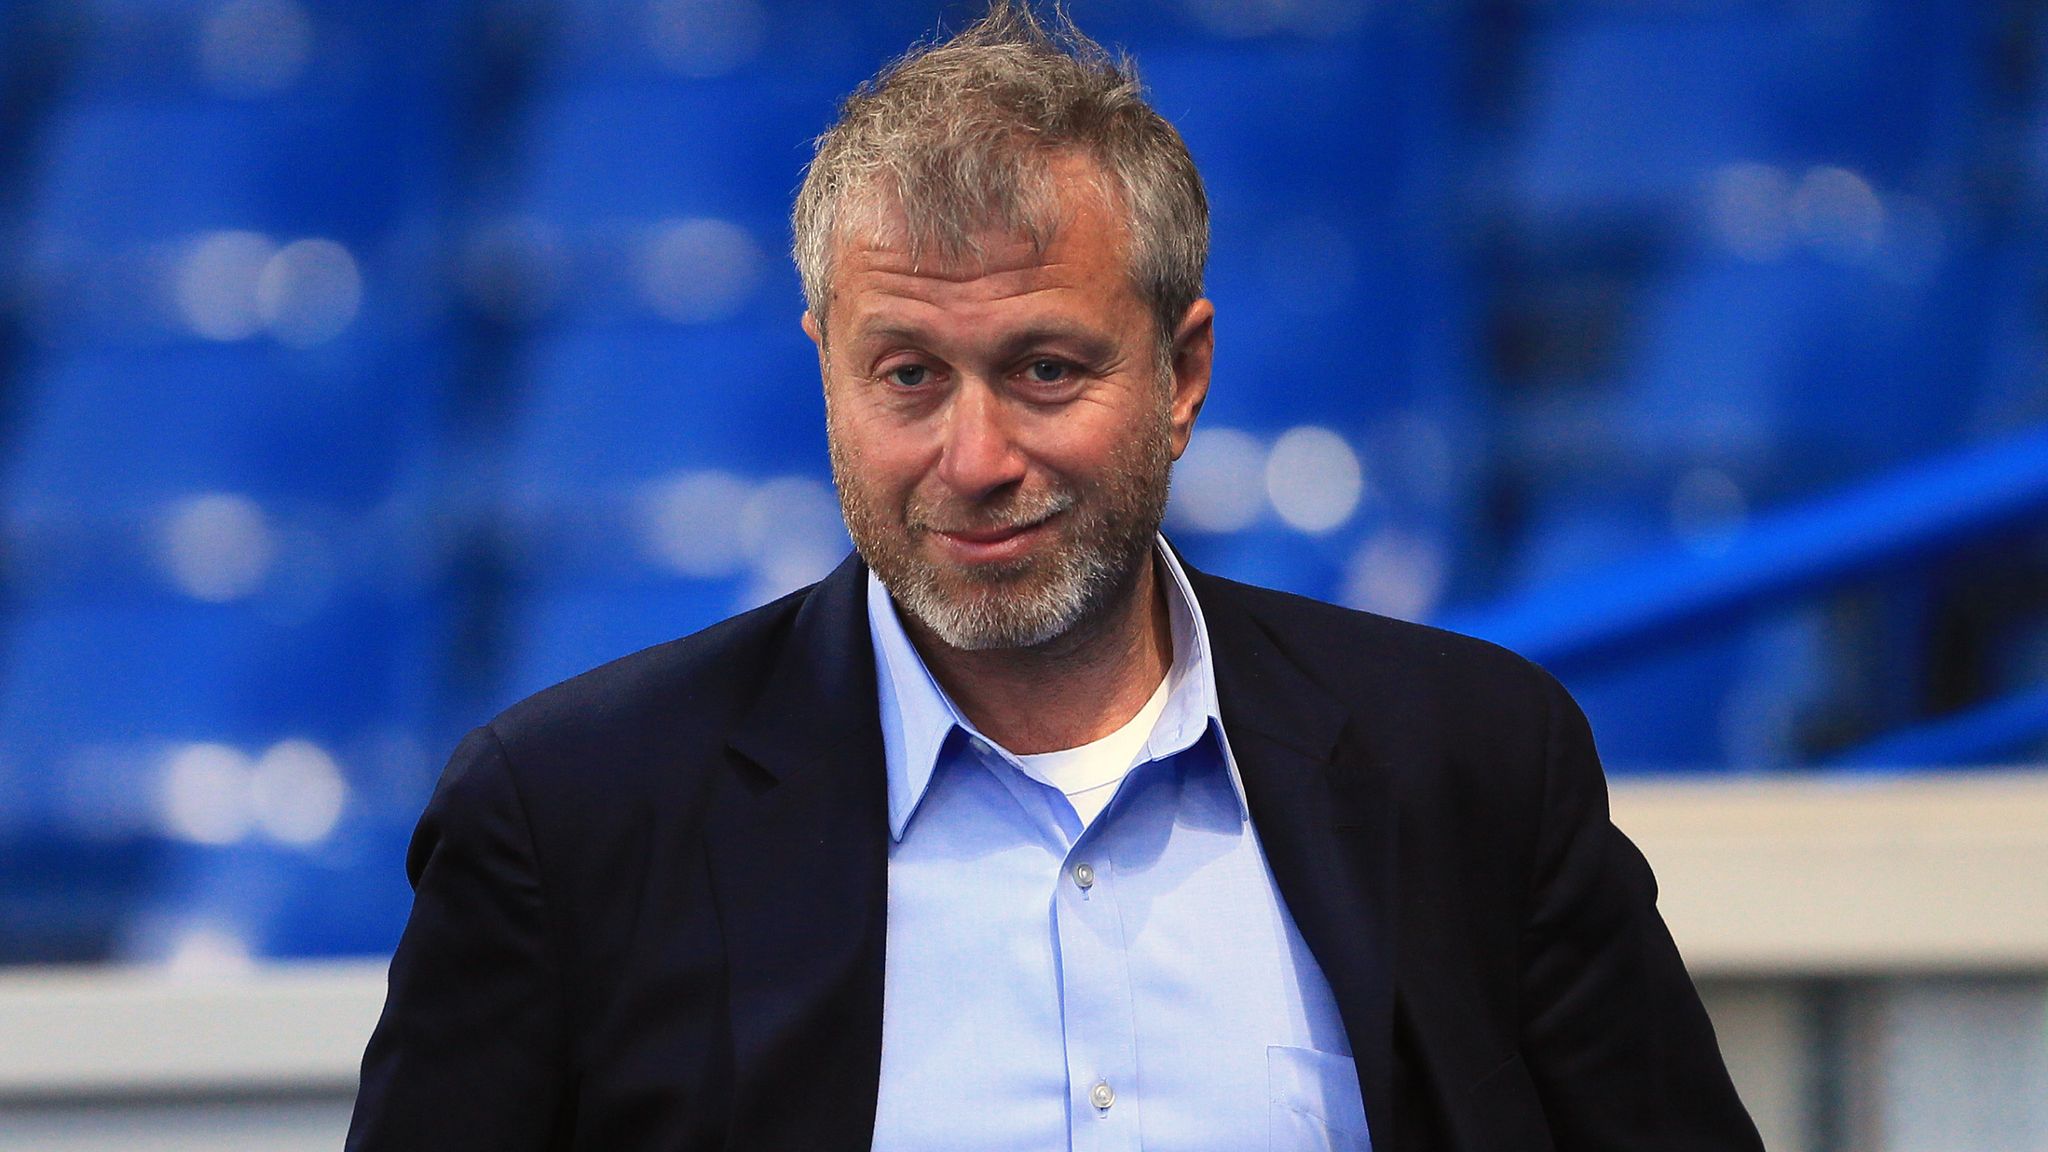 Premier League investigating Chelsea for potential financial breaches  during Roman Abramovich's ownership | Football News | Sky Sports